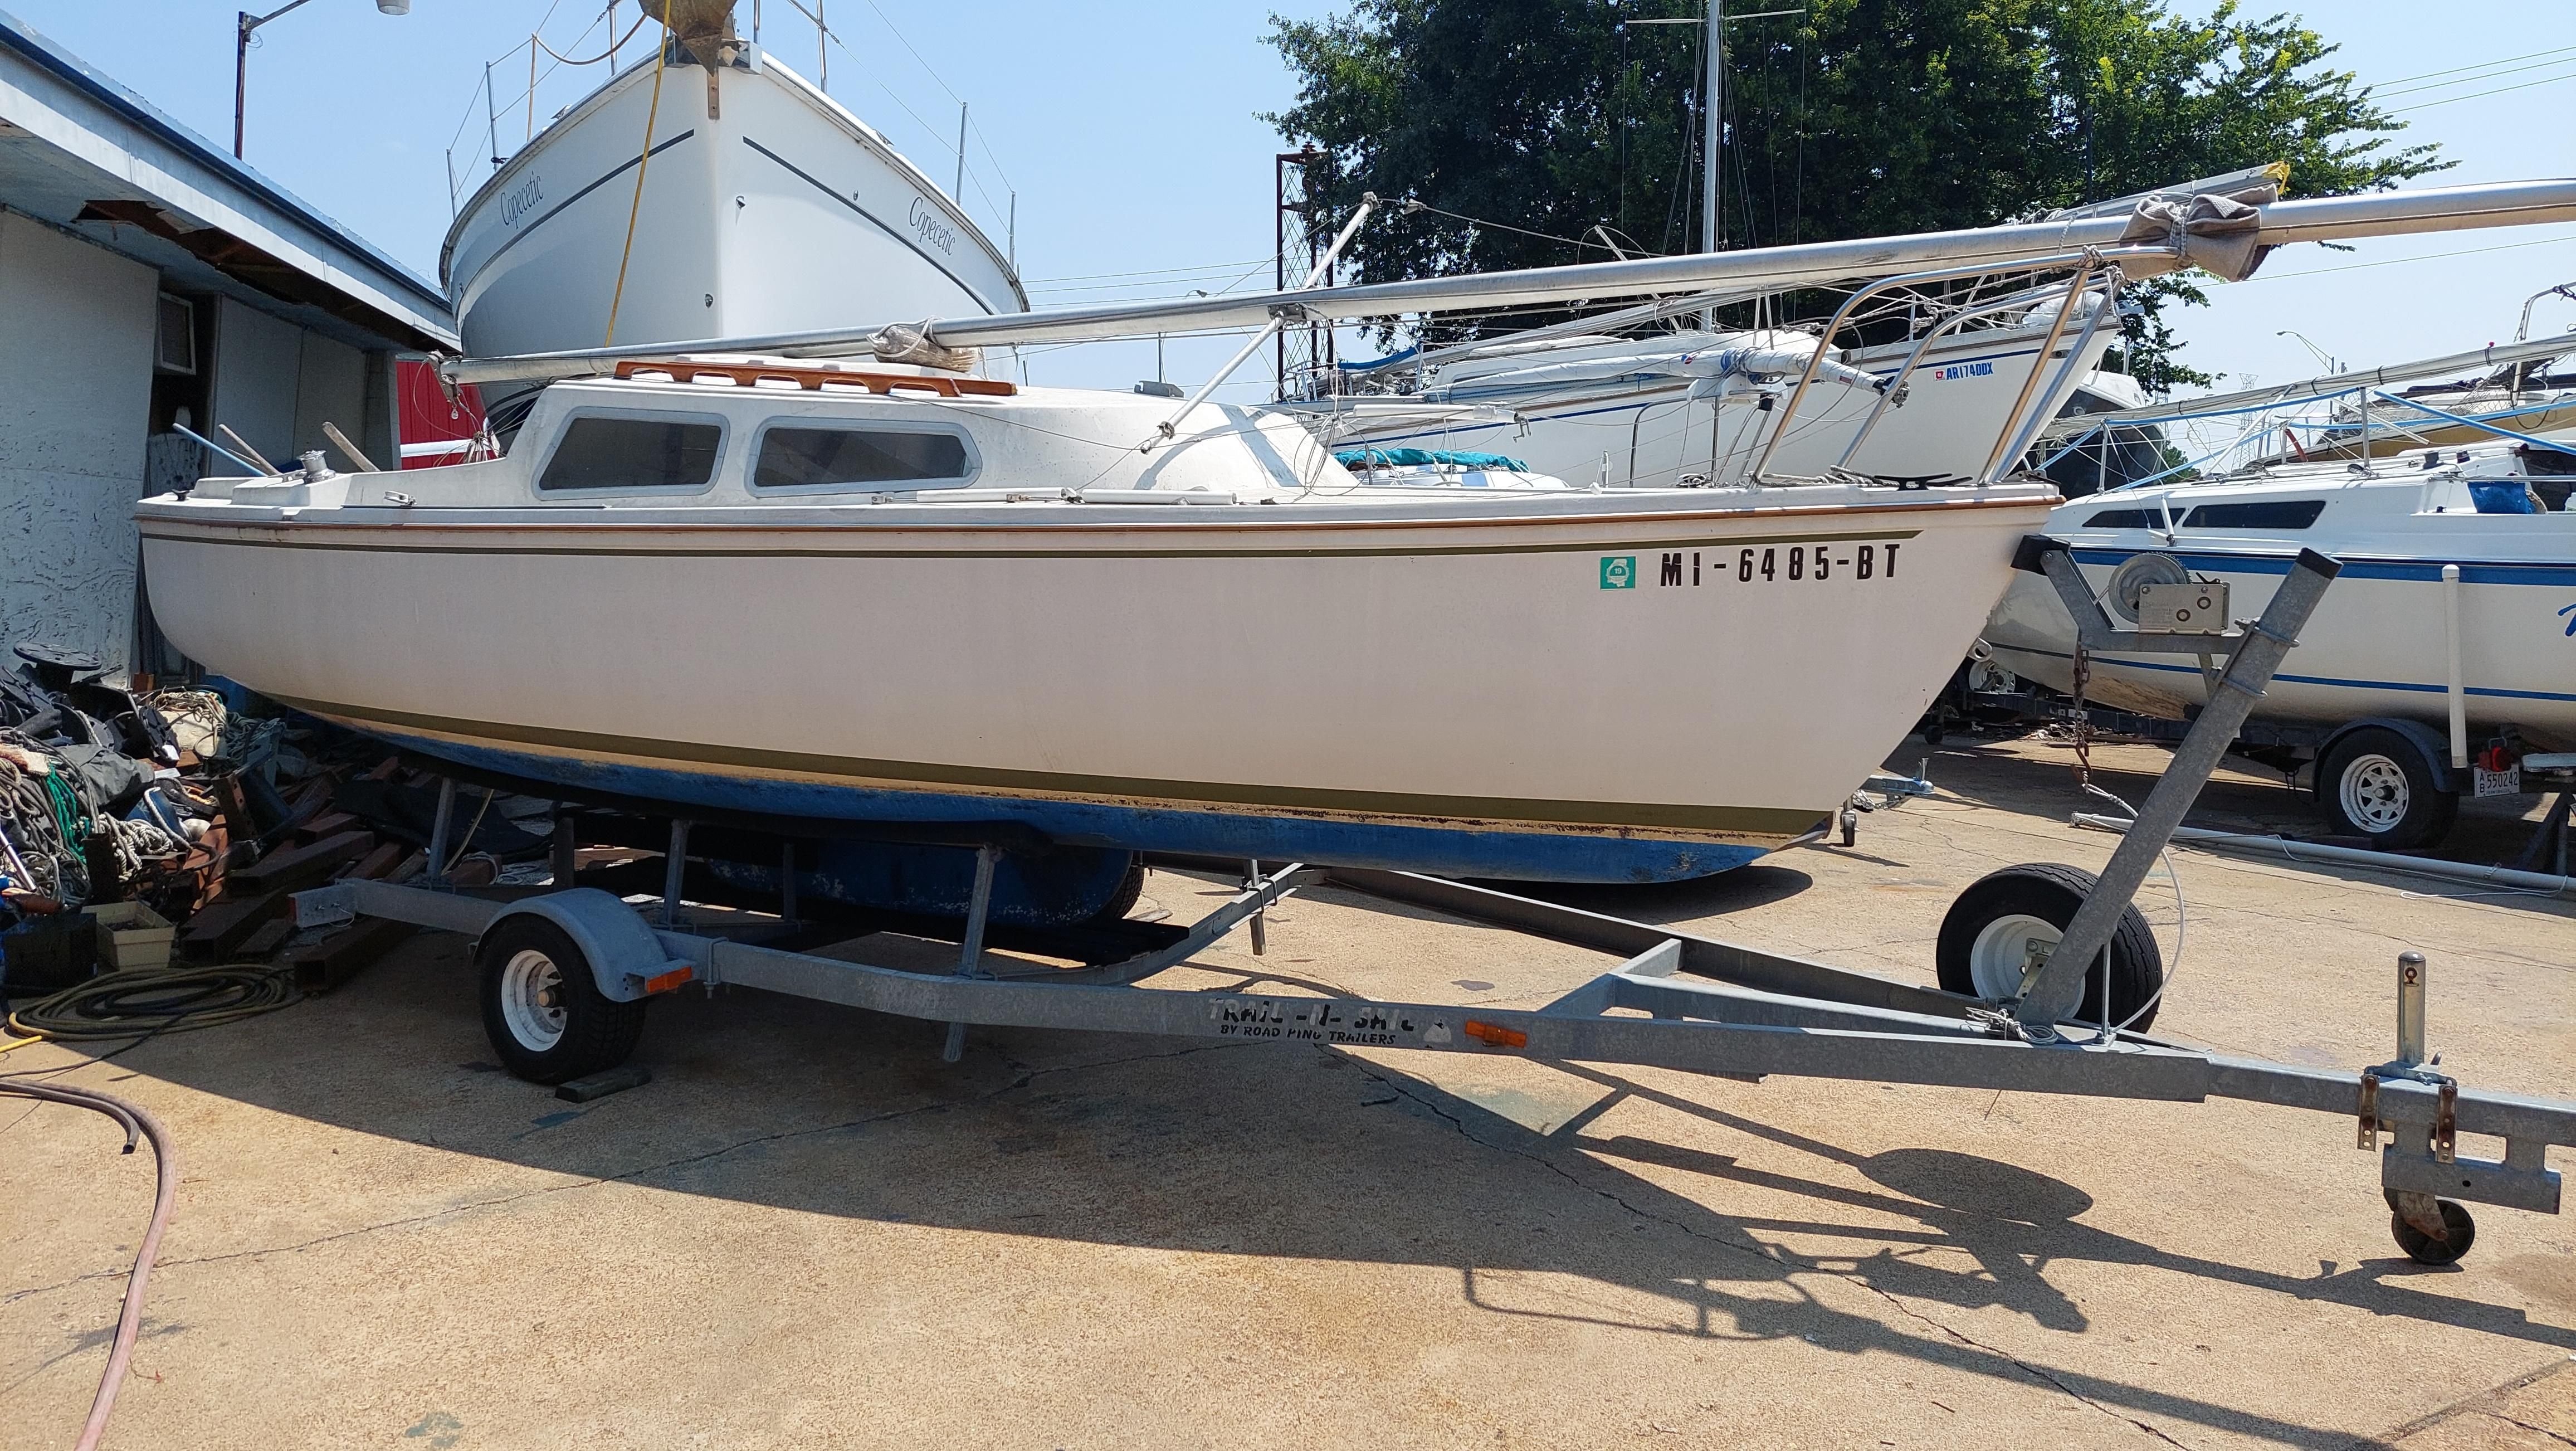 22 catalina sailboat for sale